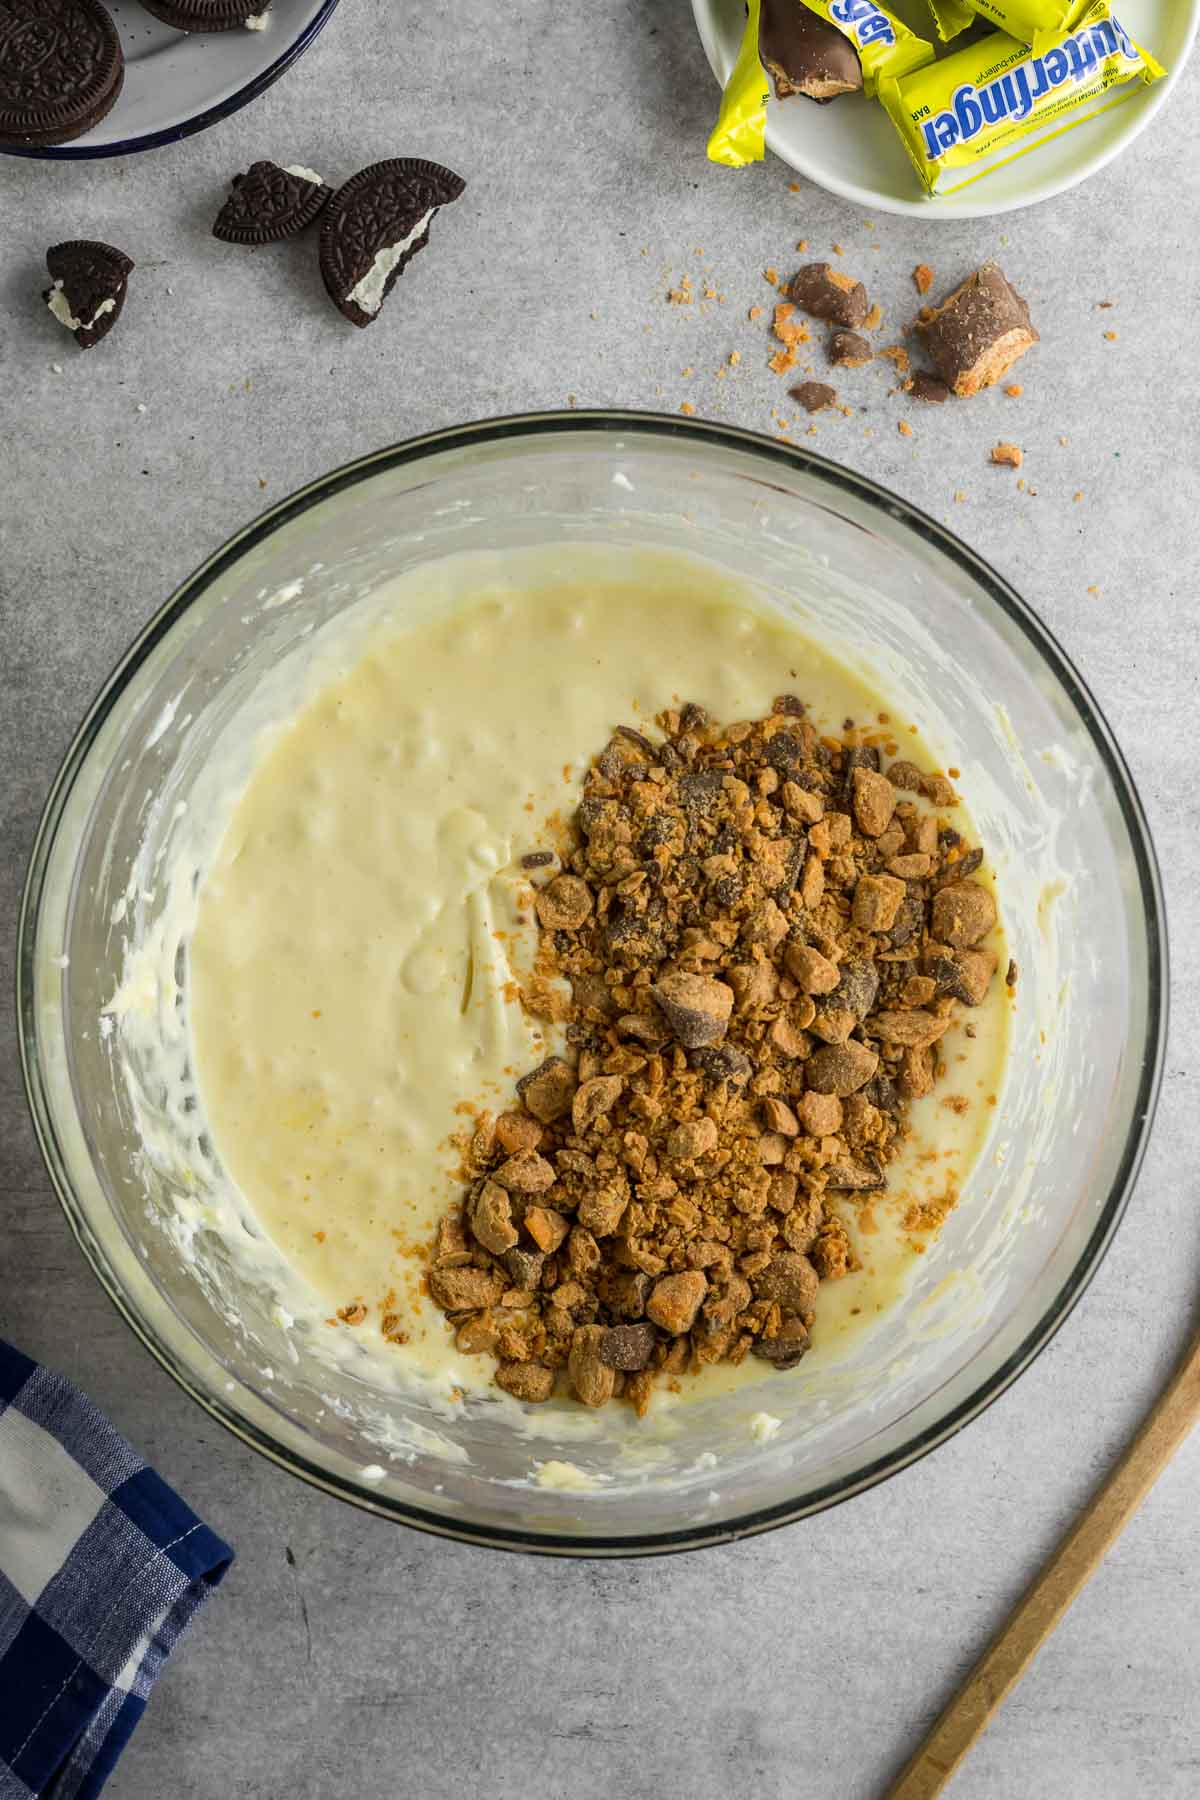 butterfingers added to cheesecake mixture in bowl